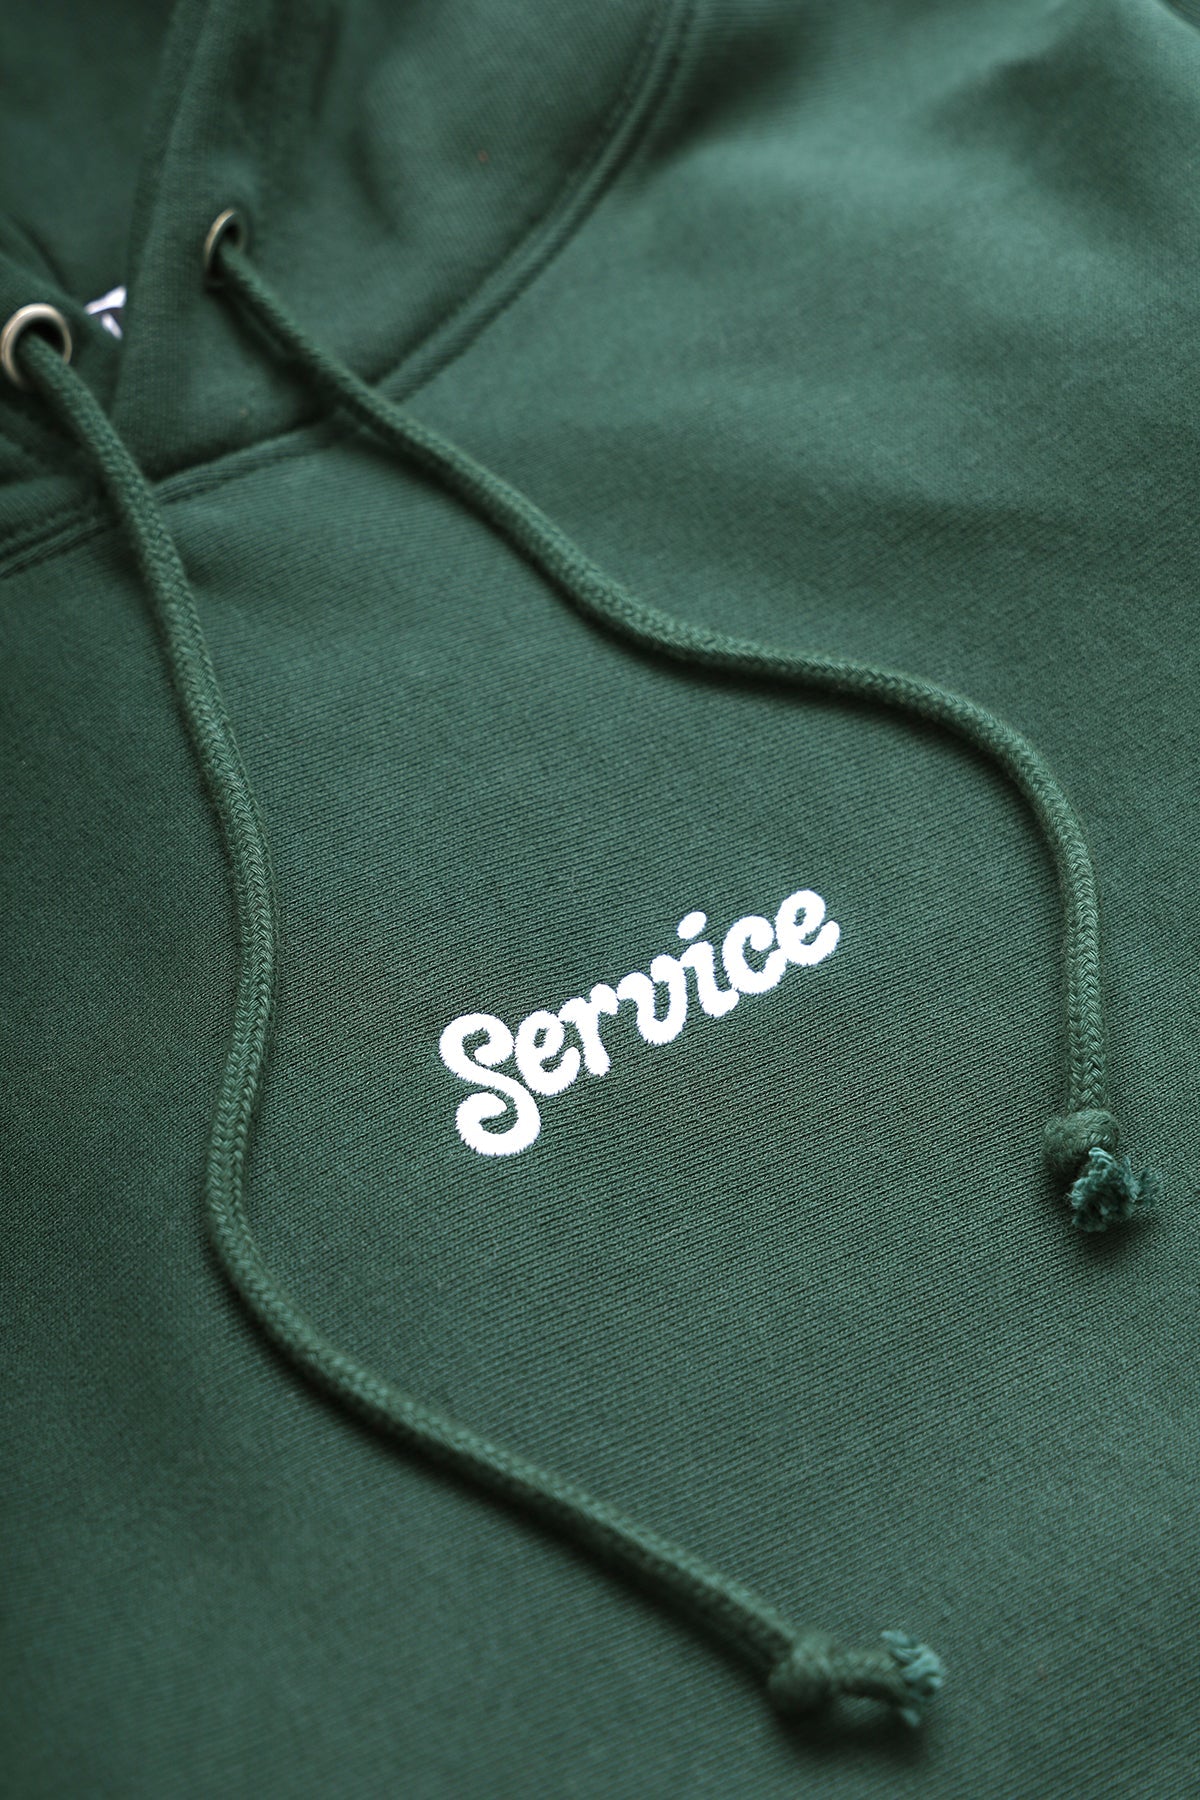 Service Works 12oz Service Embroidered Hoodie - Forest